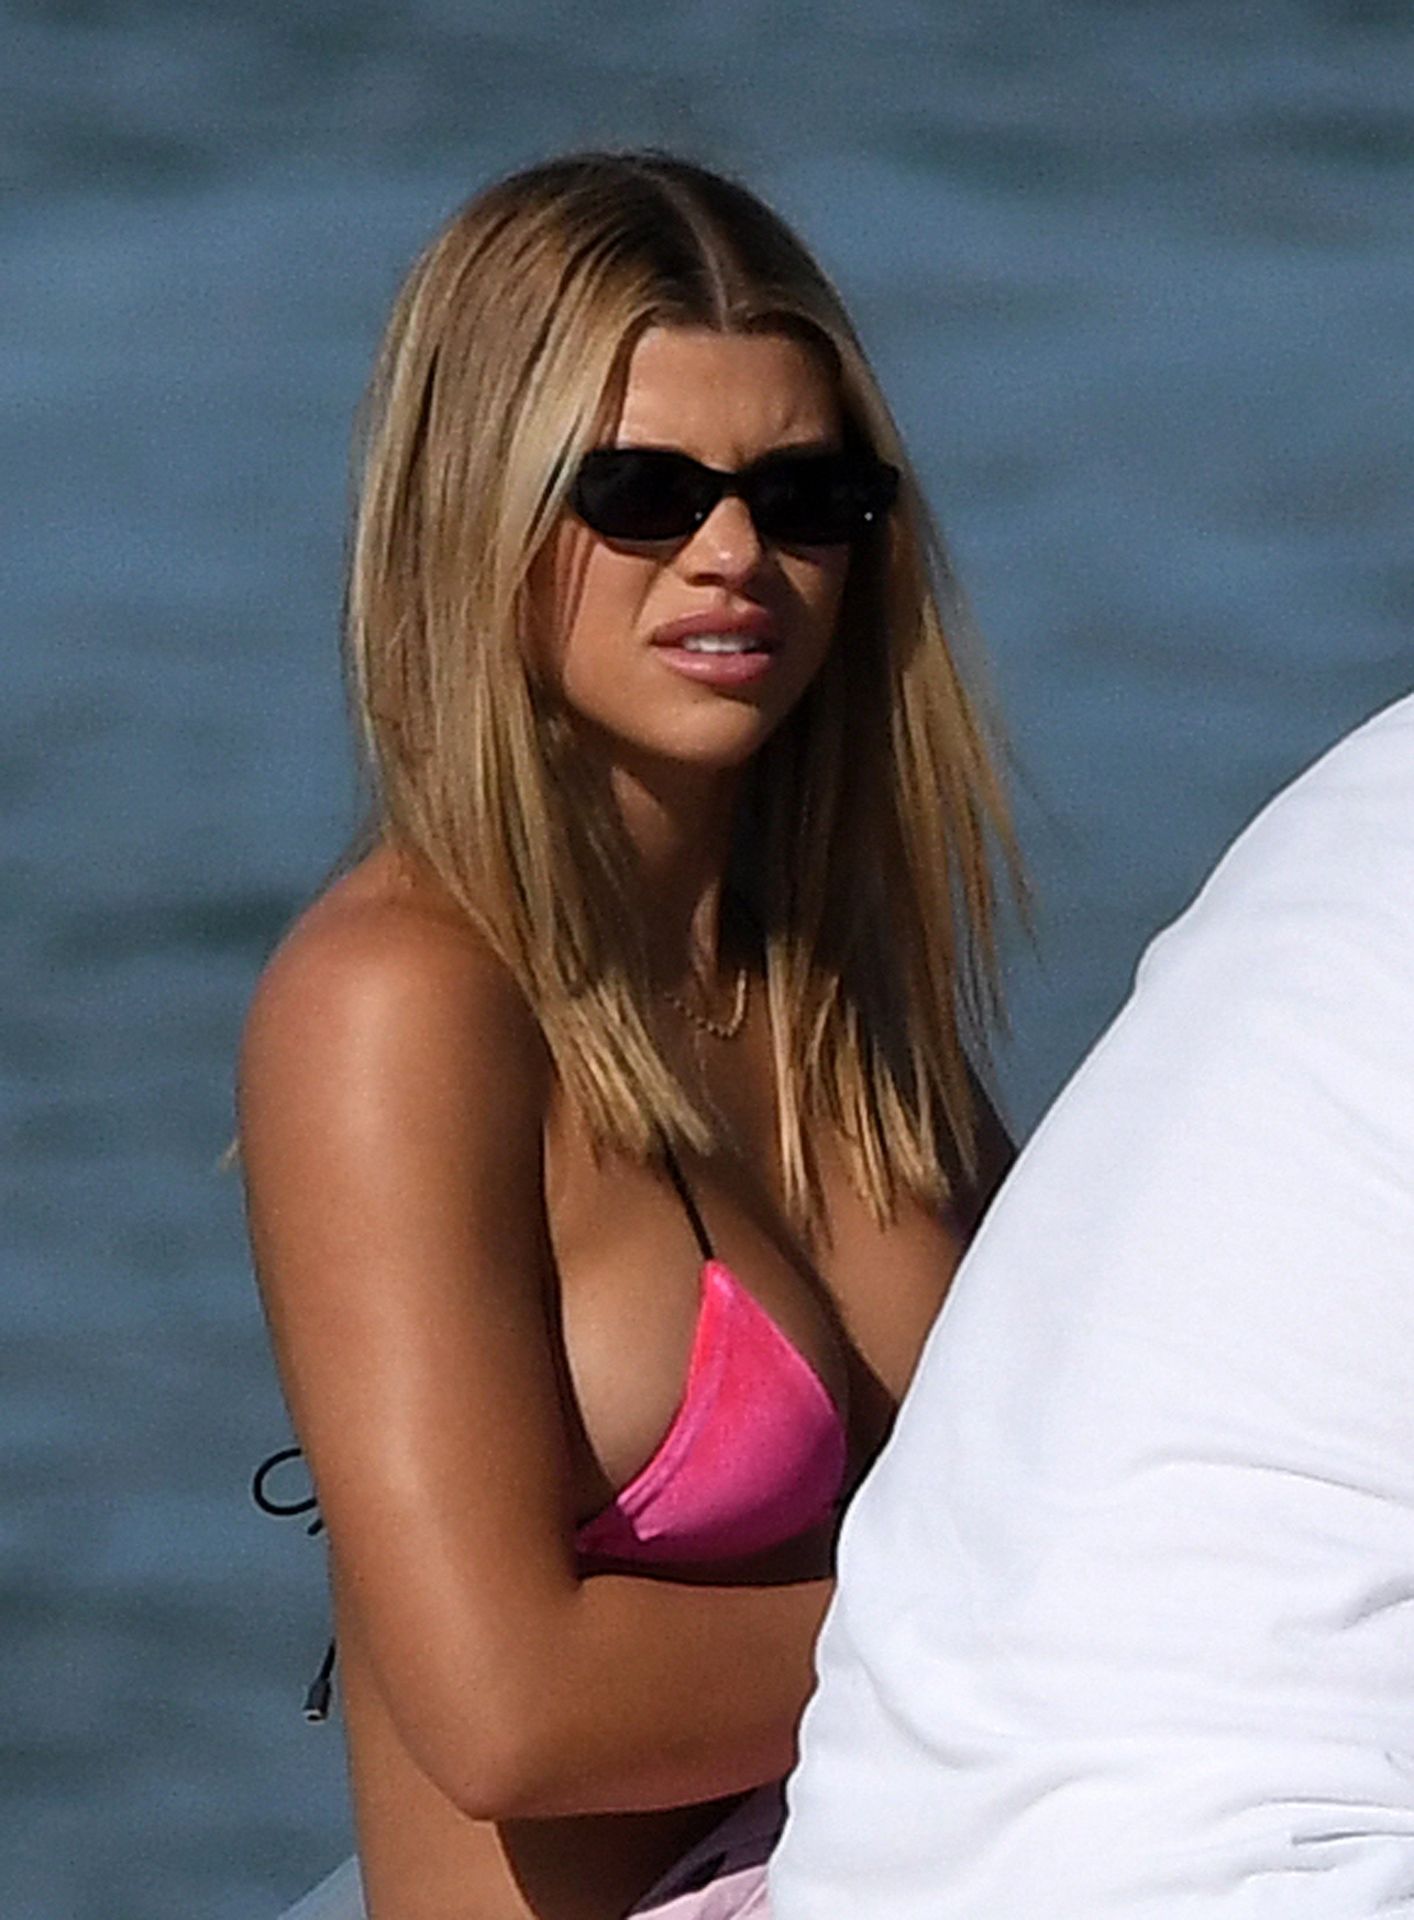 American model Sofia Richie (21) shows off her voluptuous curves in a hot p...